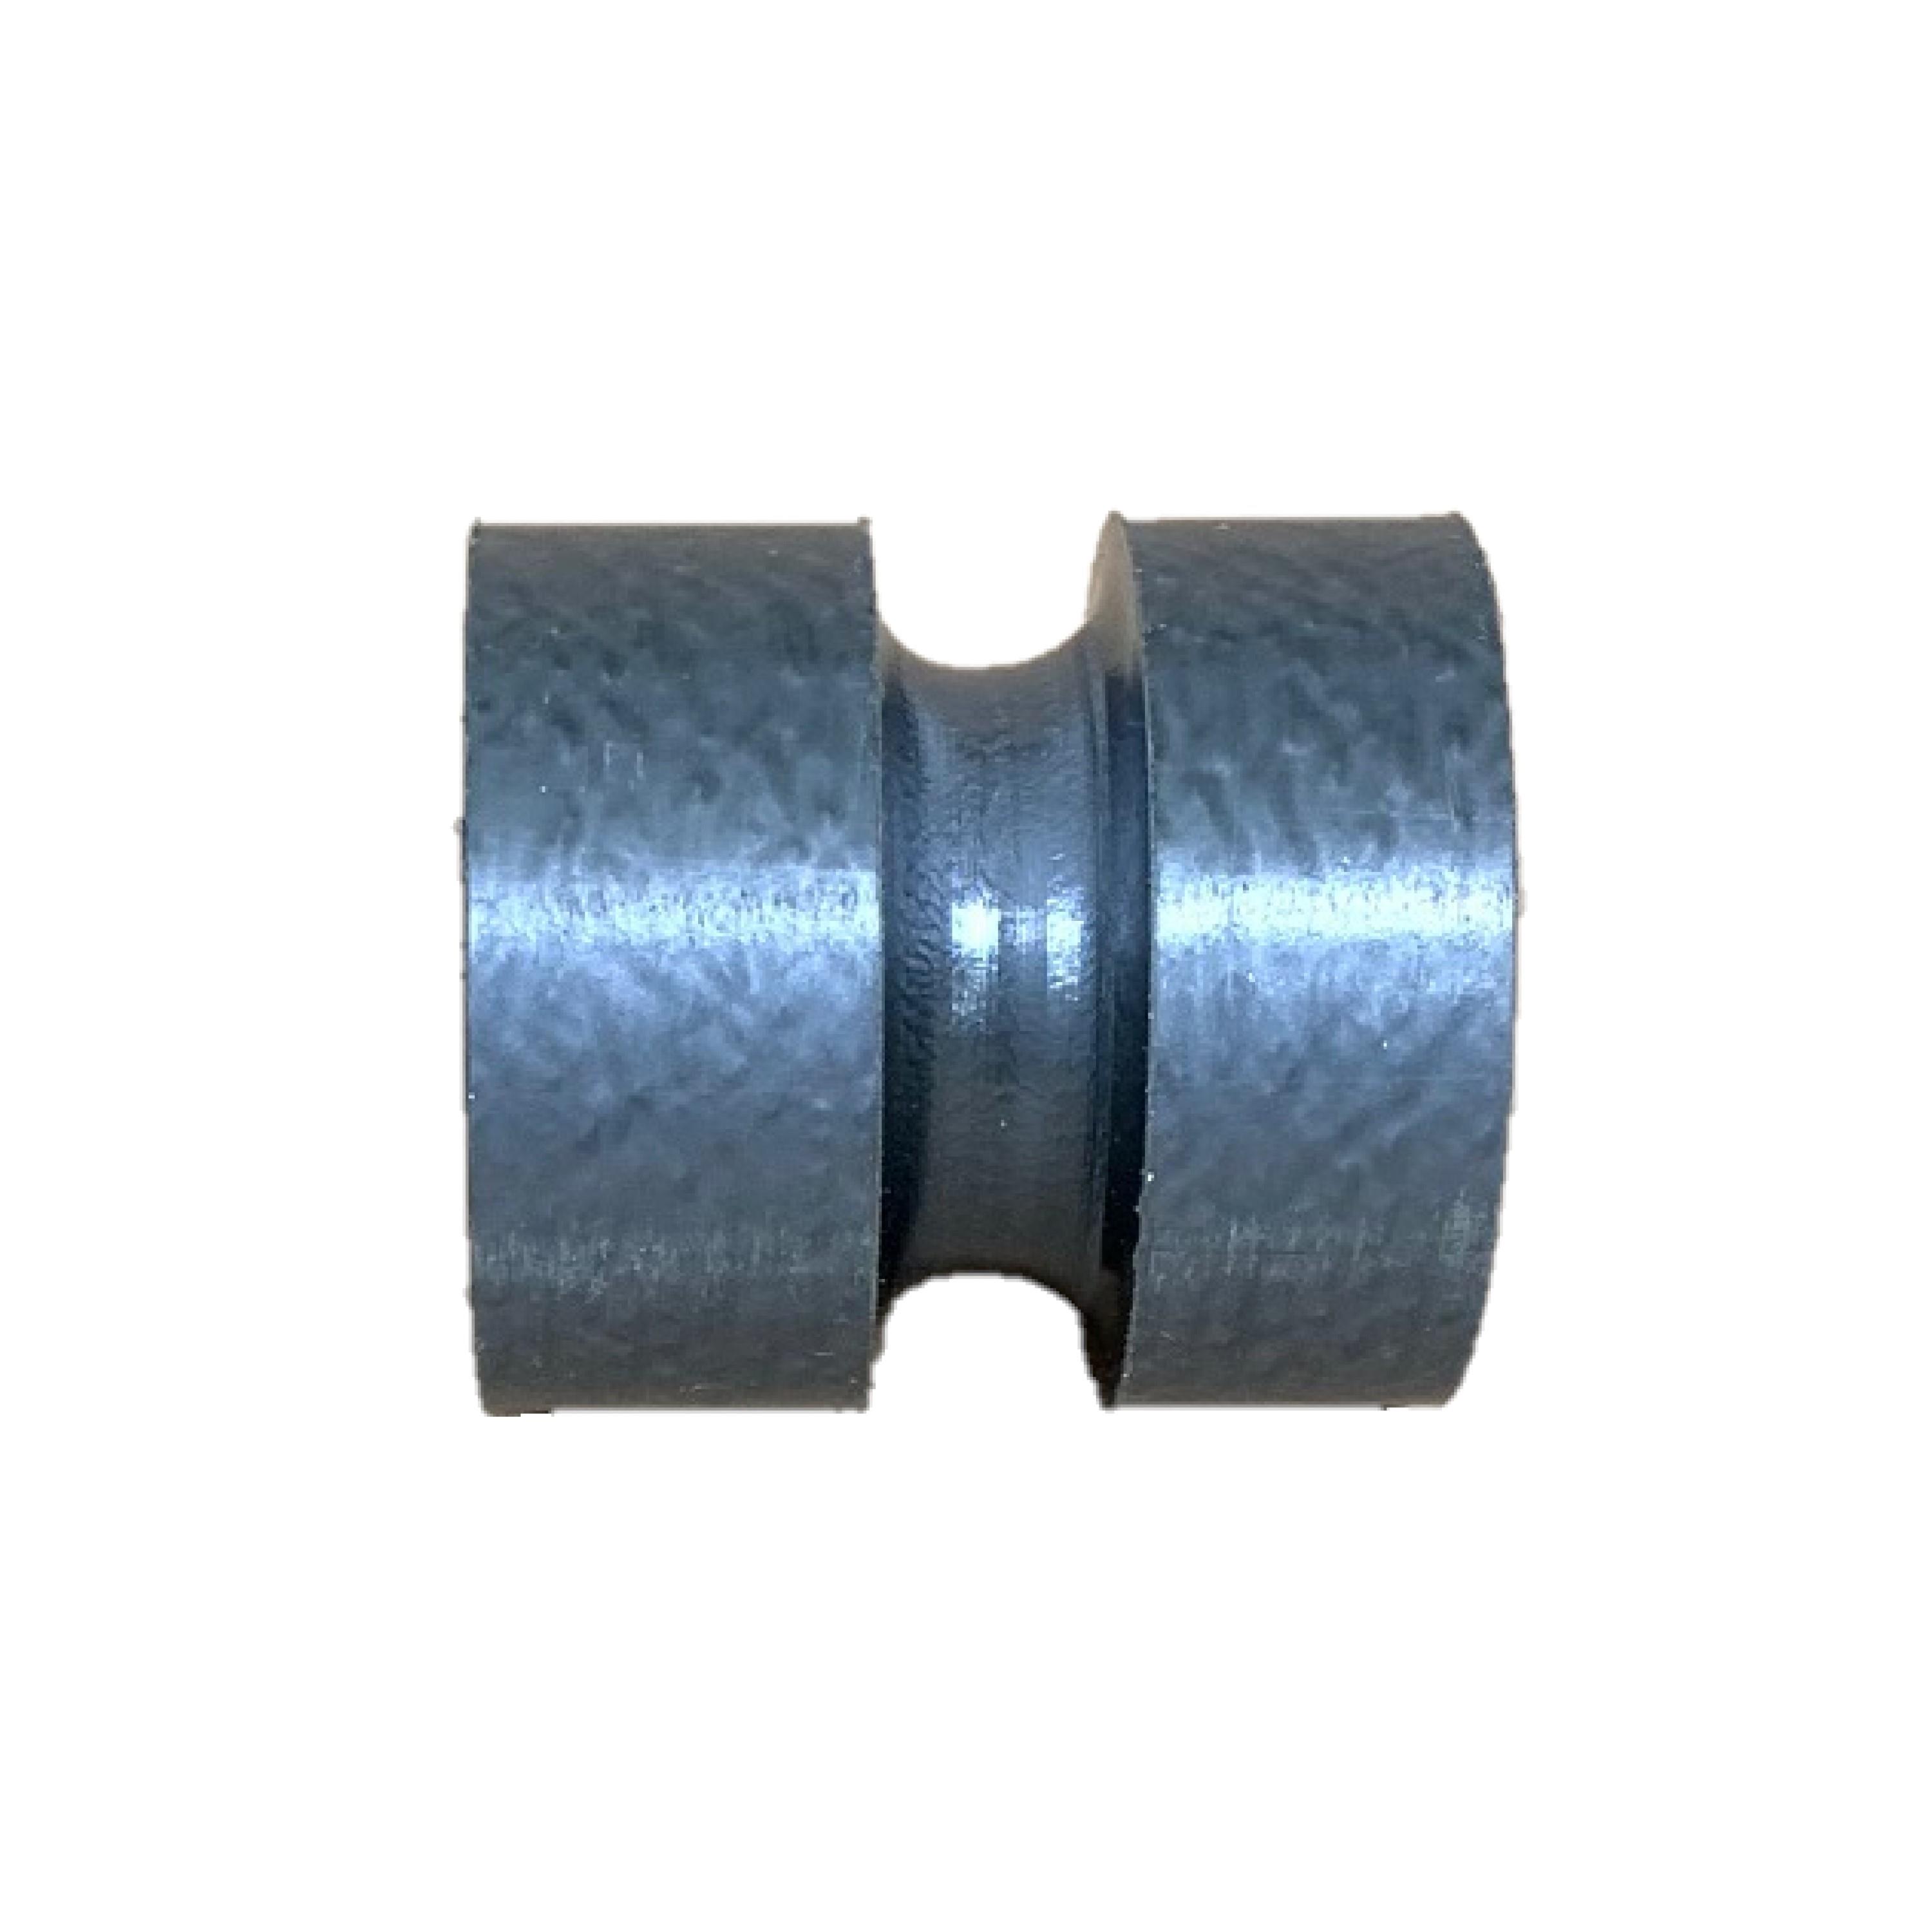 NYLON CABLE ROLLER GUIDE